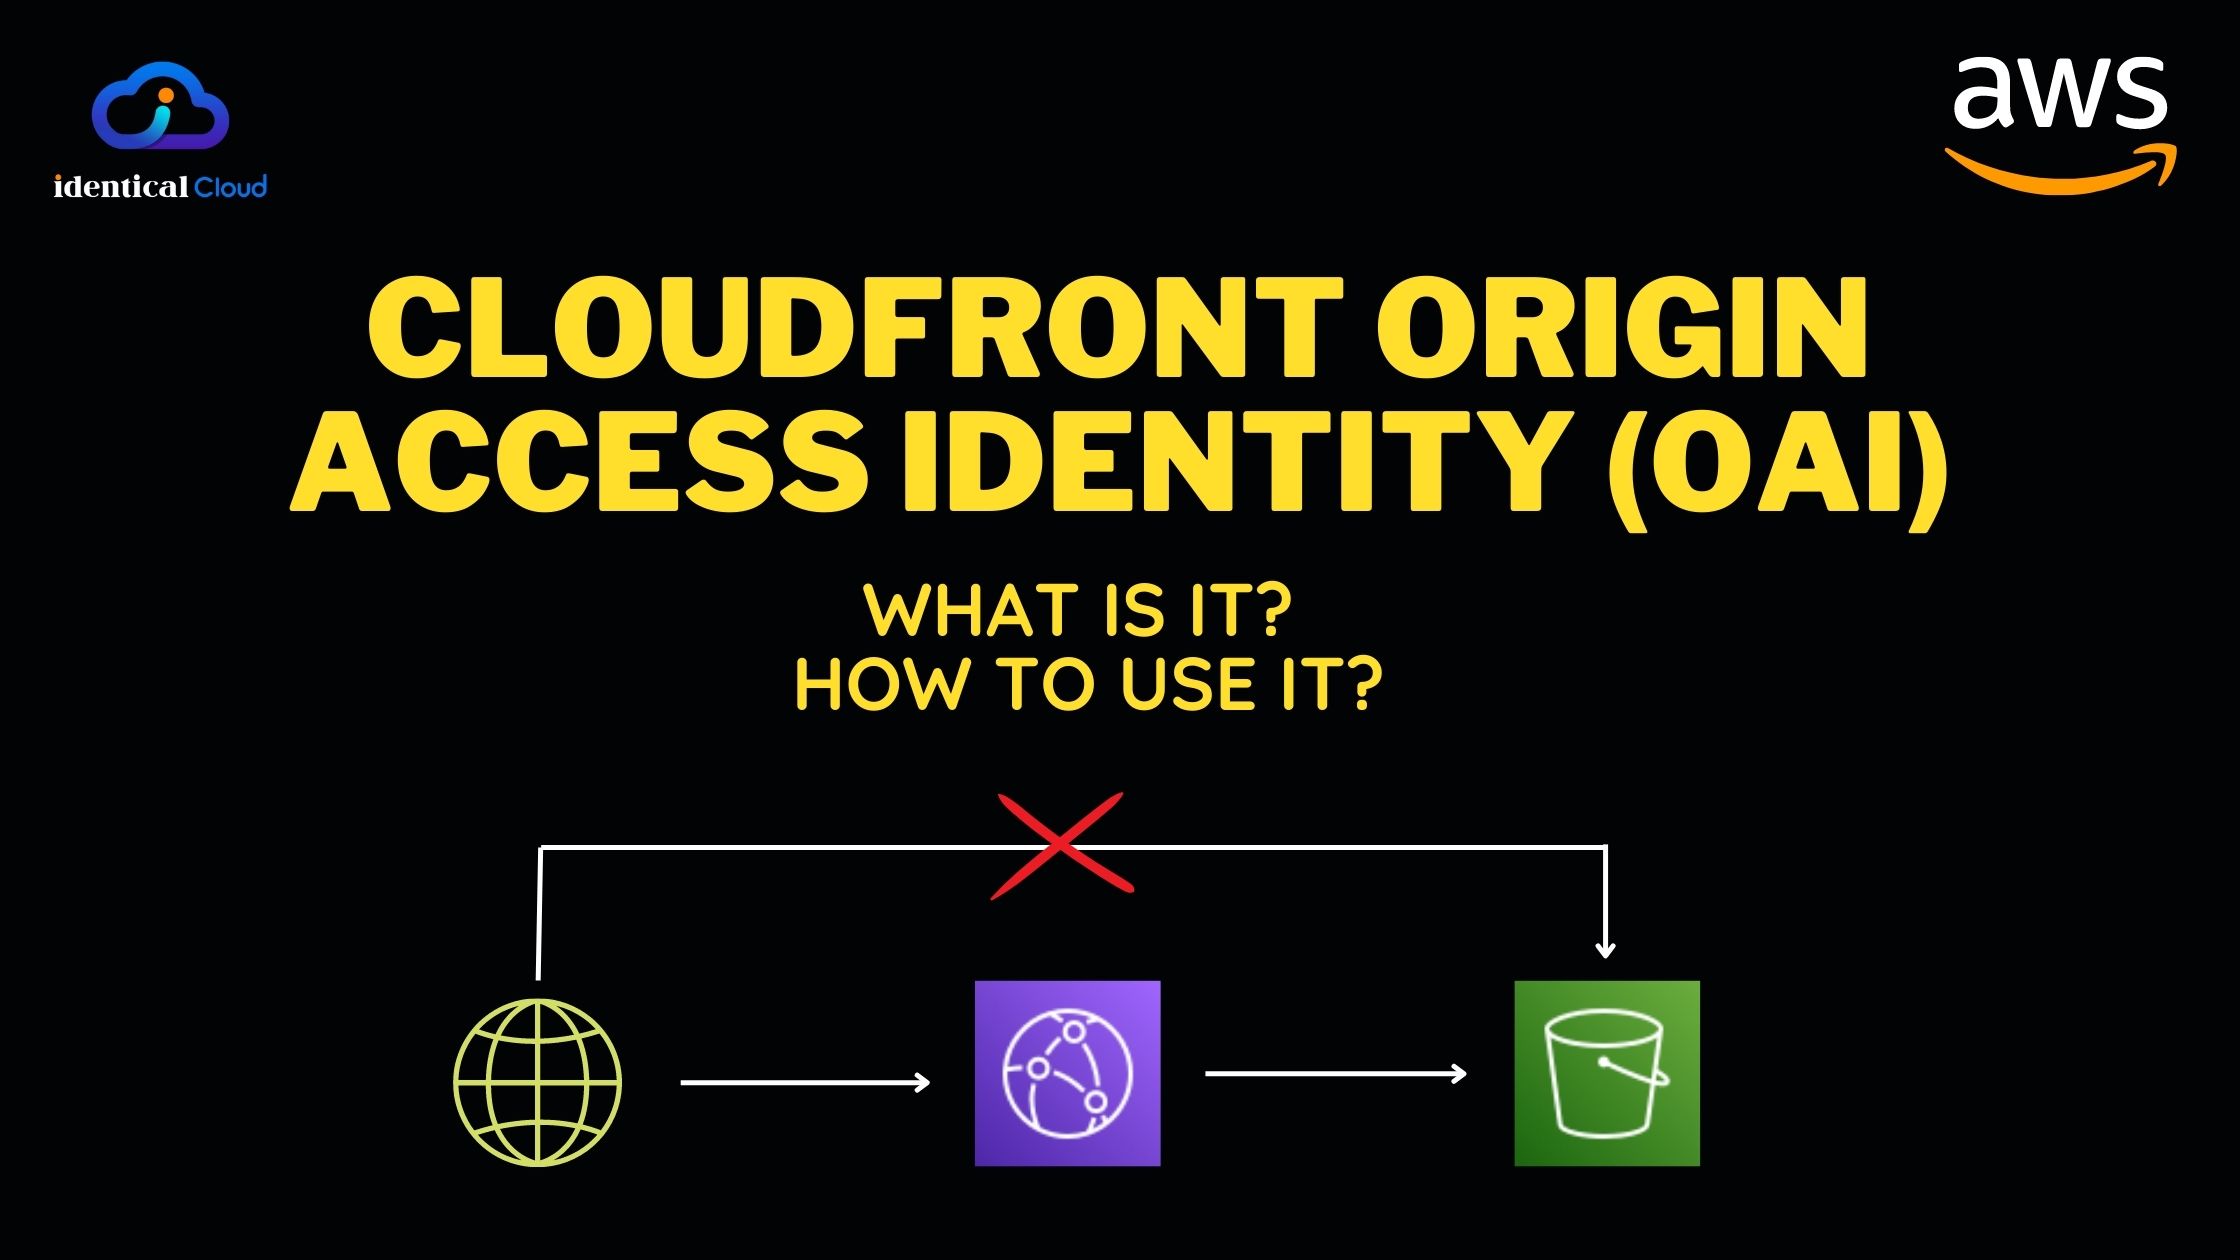 Cloudfront Origin Access Identity (OAI) - What is it and How to use it